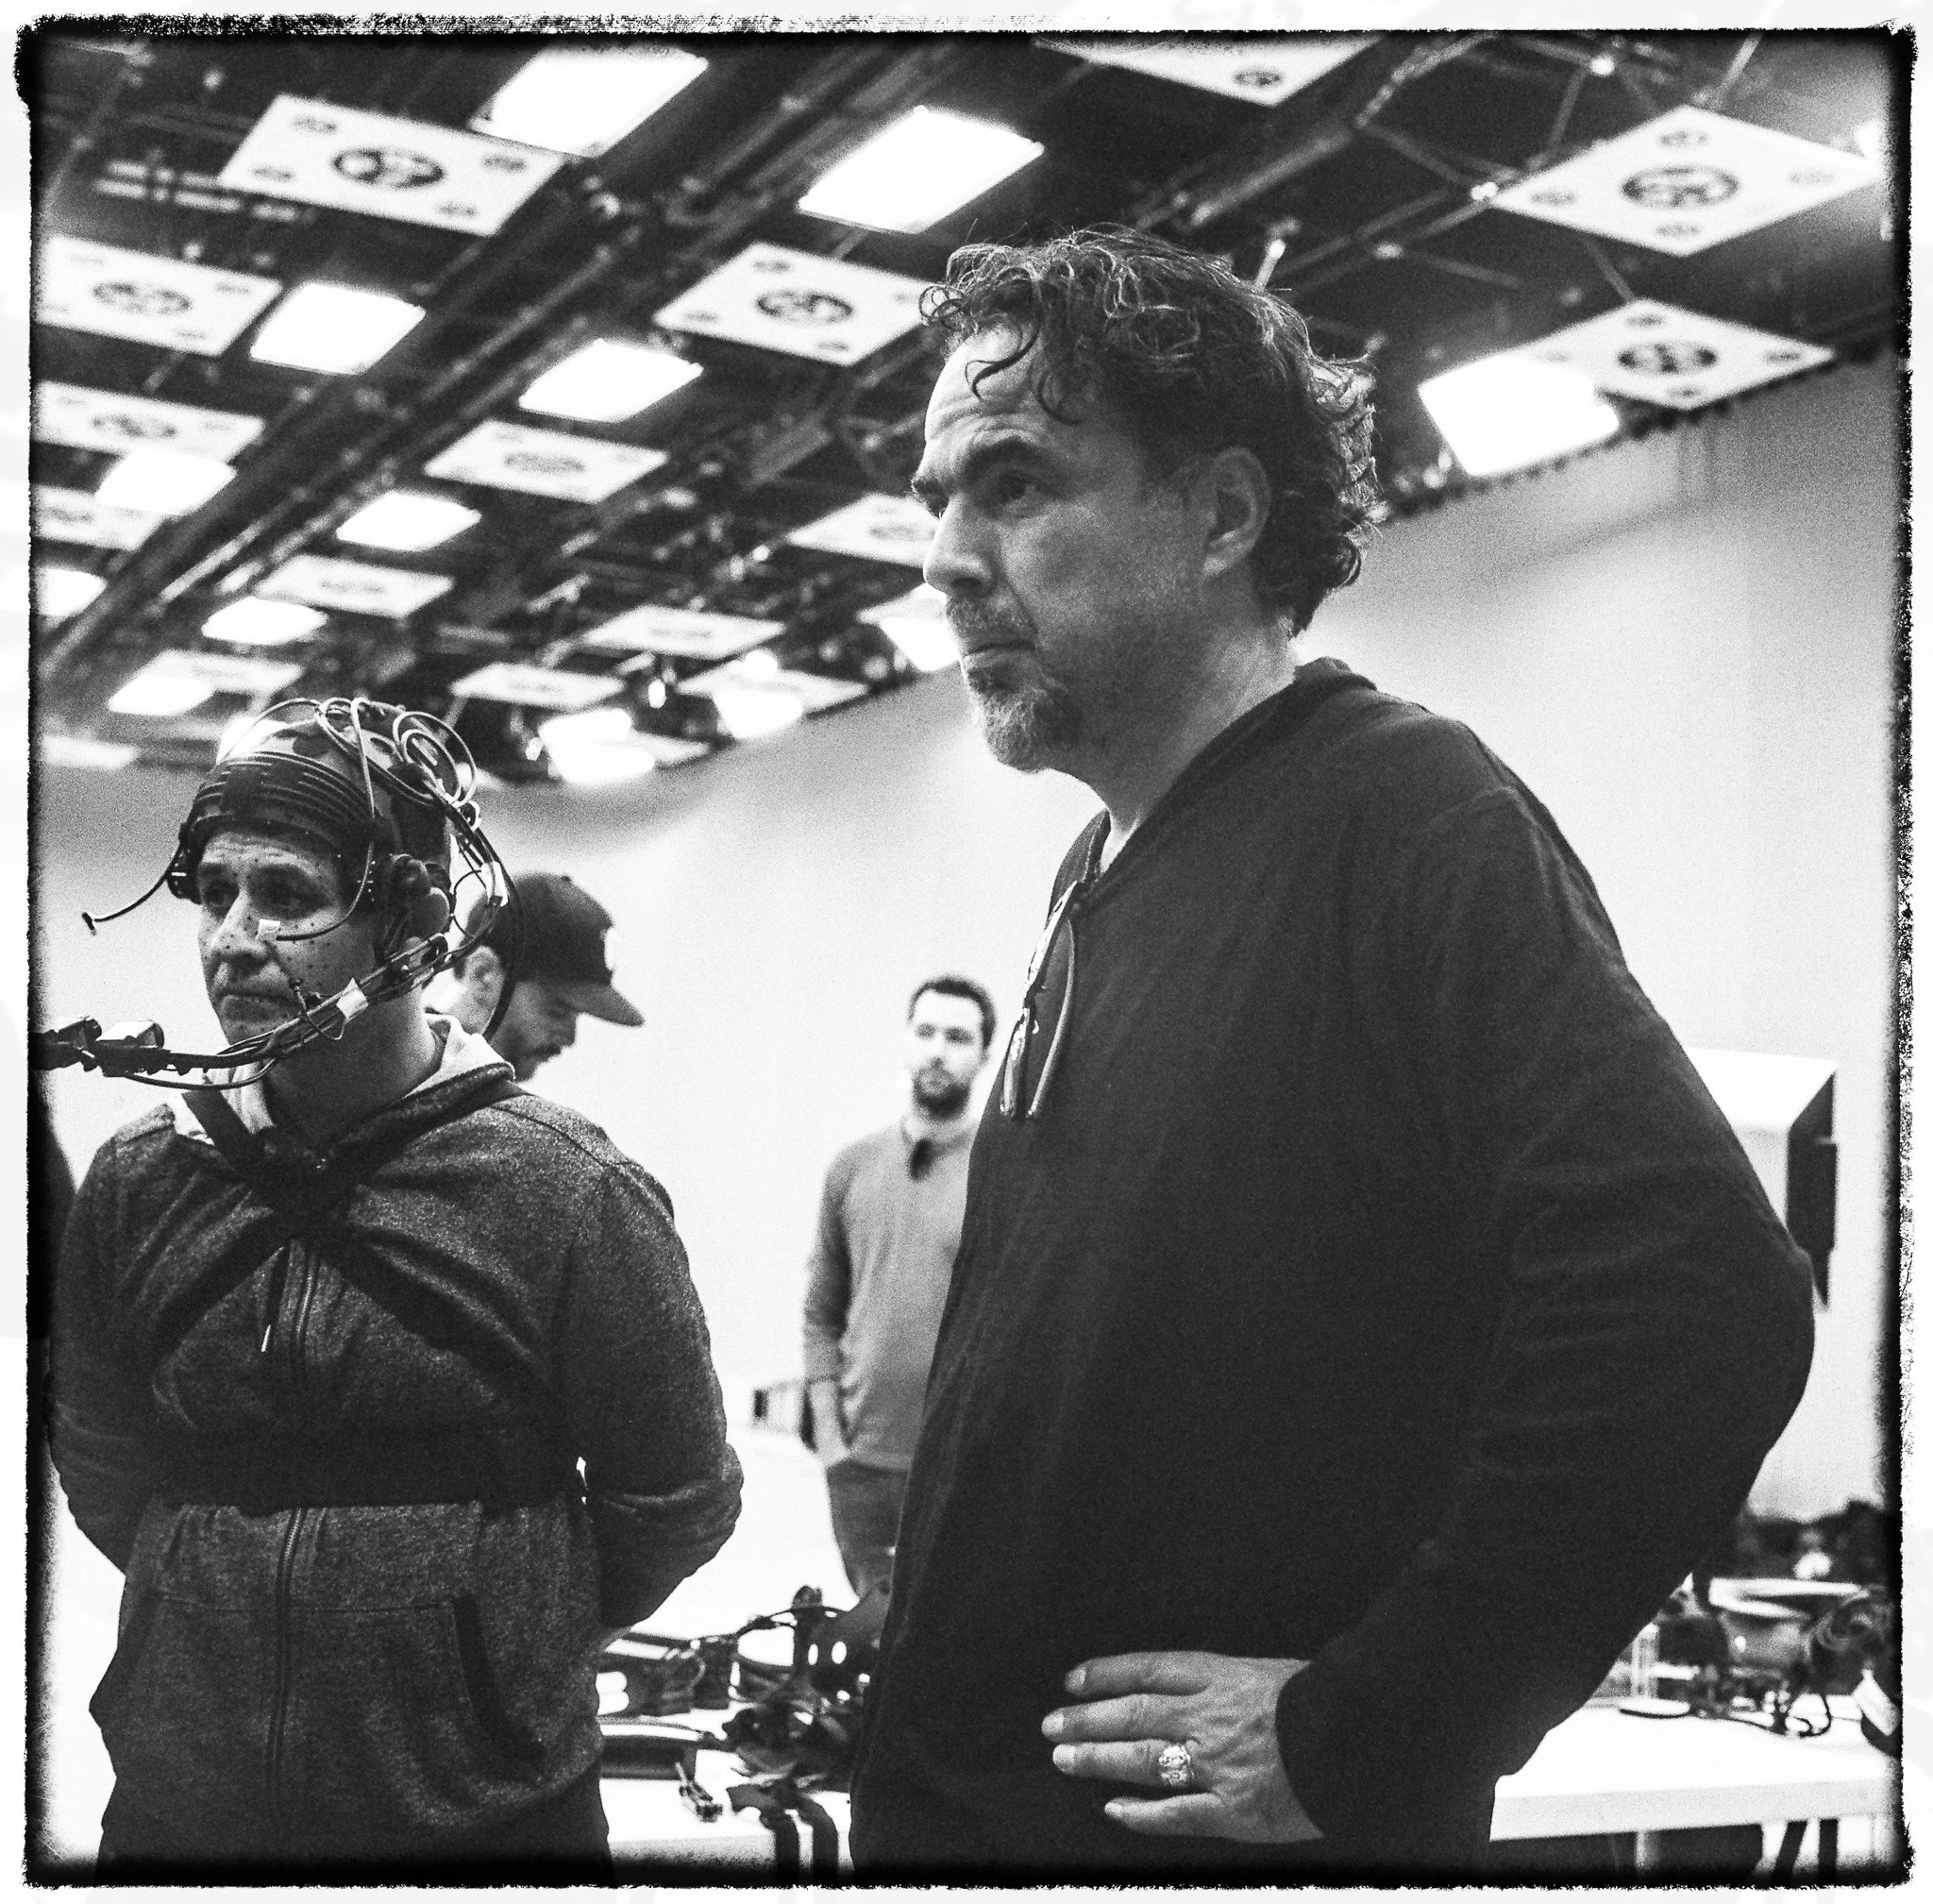 Alejandro Gonzalez Iñárritu, right, on the set of a VR project that puts you in the desert with Latin American immigrants under assault.